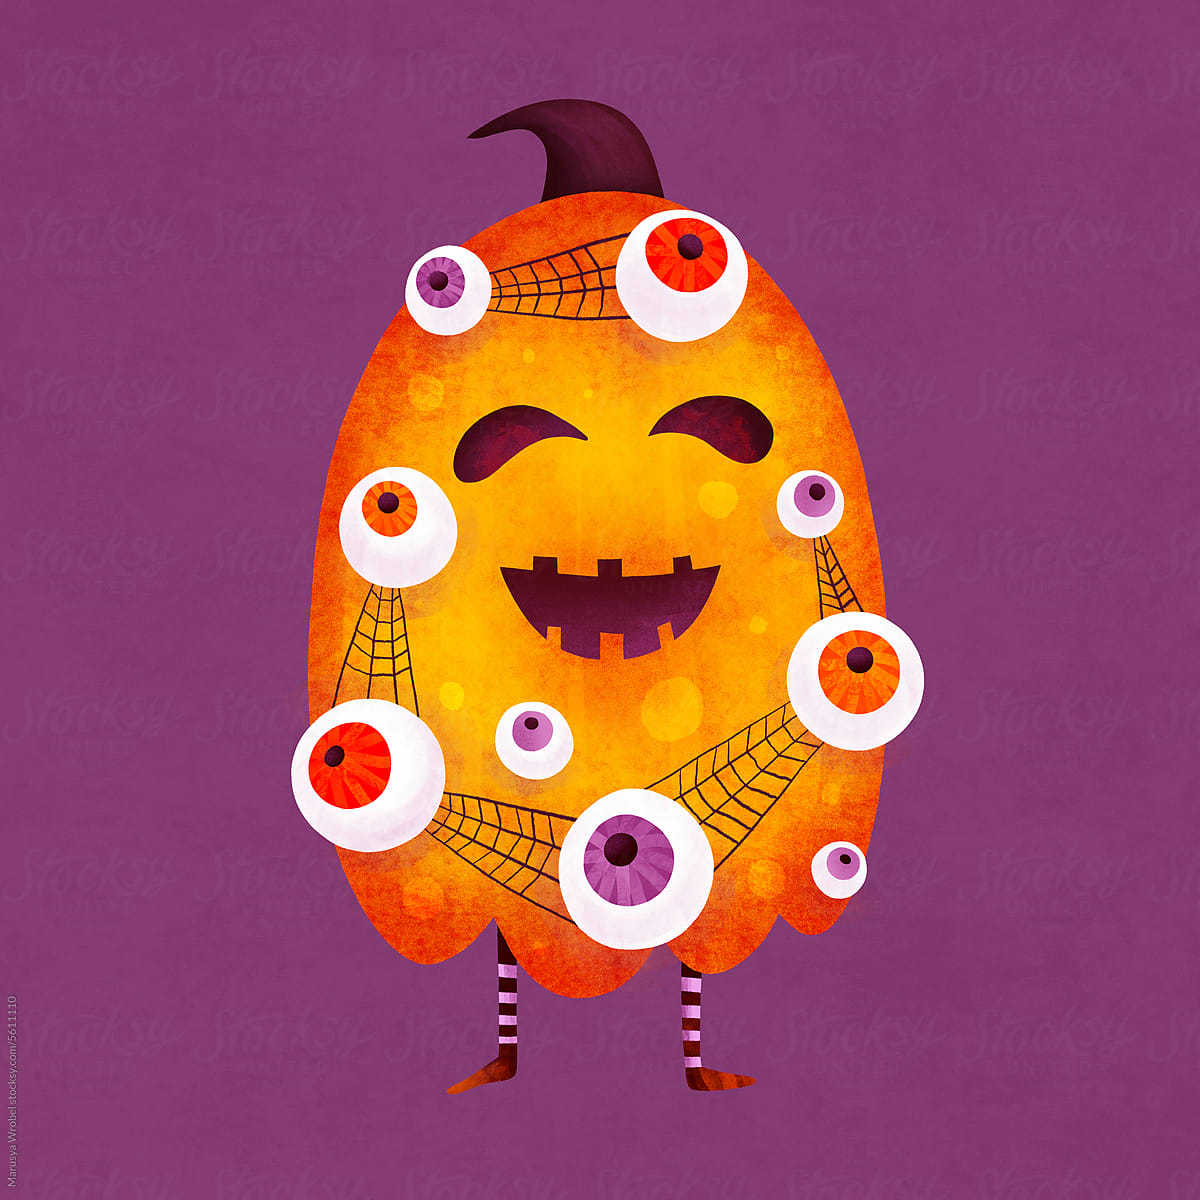 Halloween pumpkin character with colorful eyes